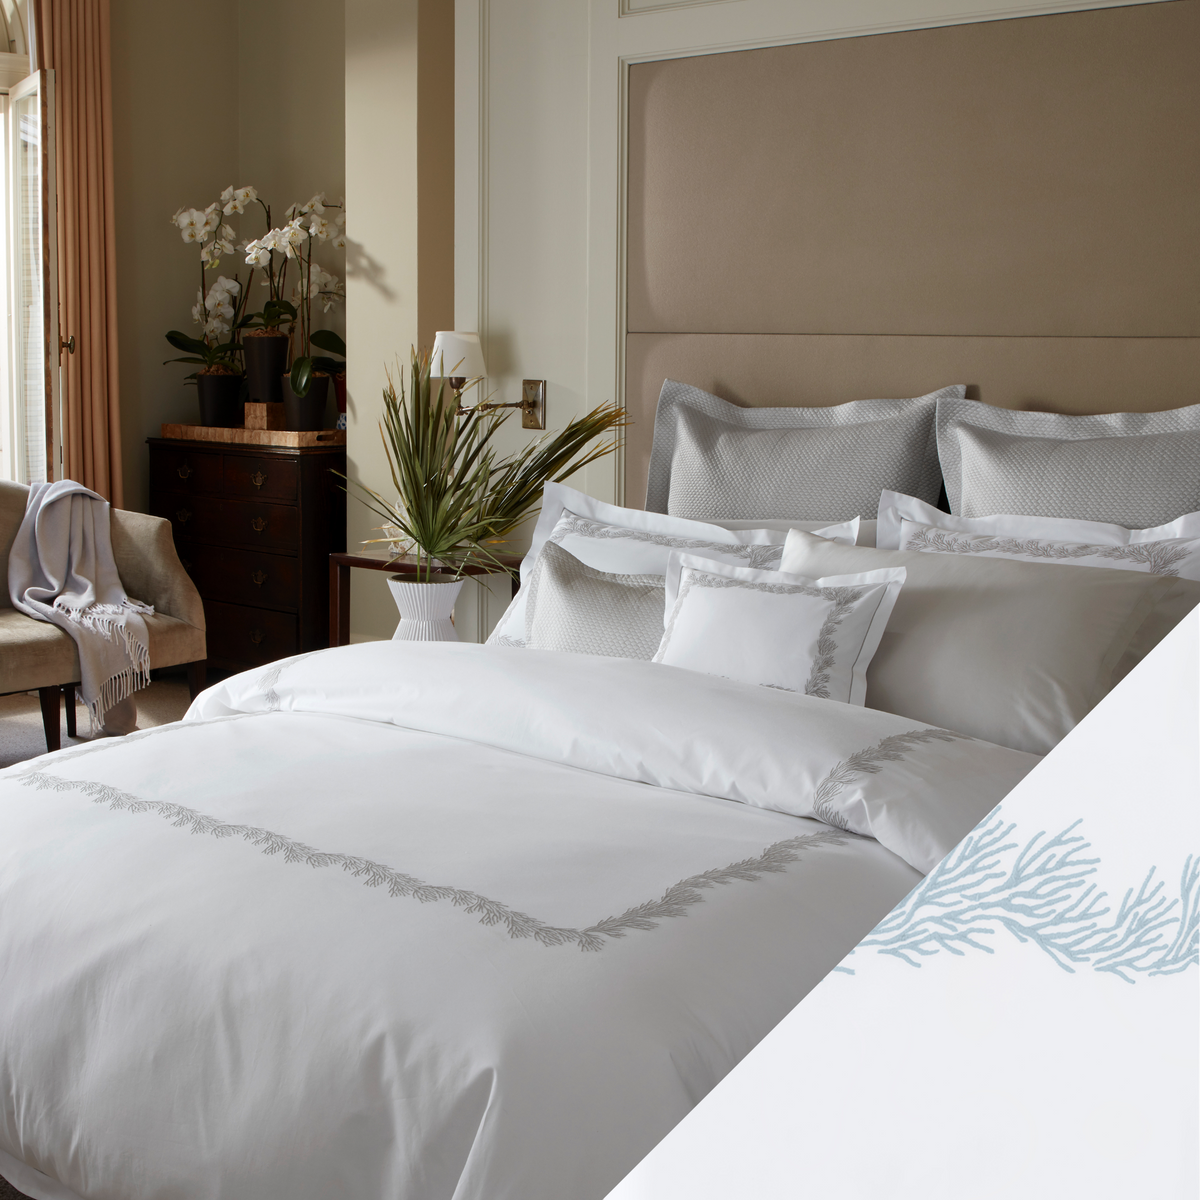 Full Lifestyle Image of Matouk Atoll Bedding Collection with Swatch of Wedgewood